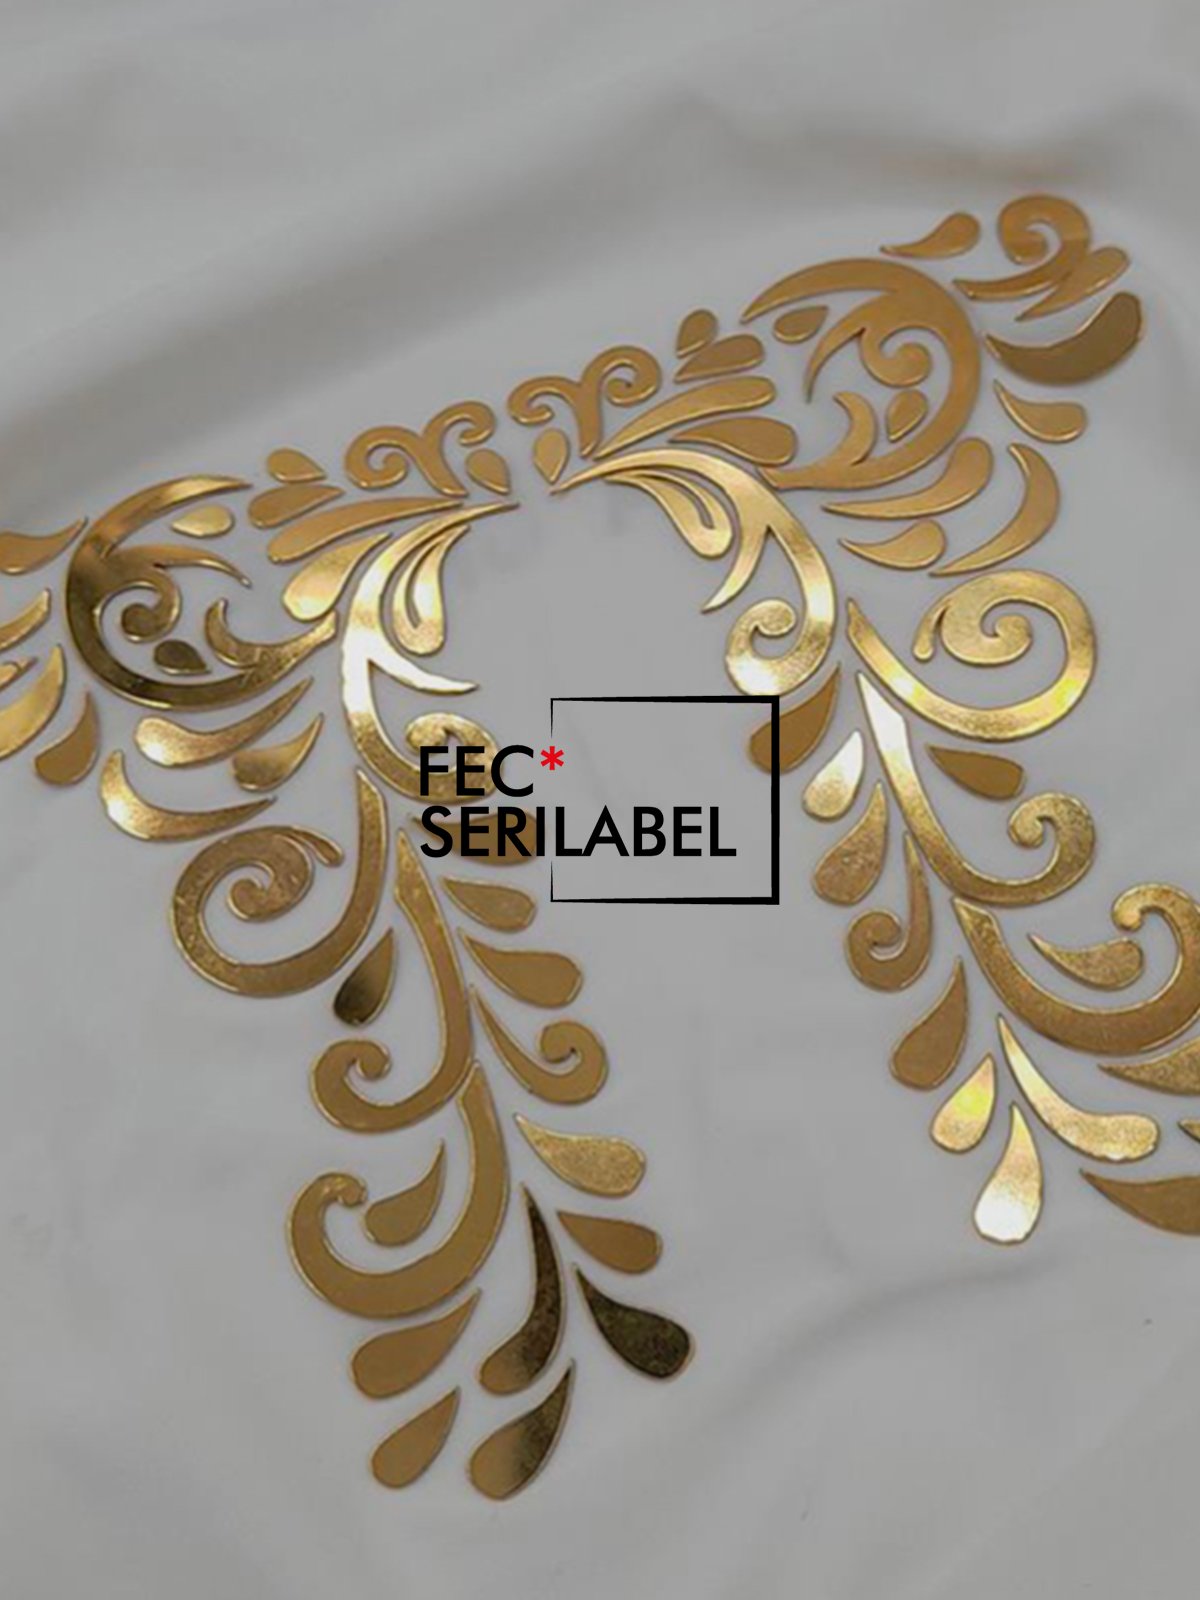 The Made in Italy soul of a company that has always been at the forefront by FEC*SERILABEL